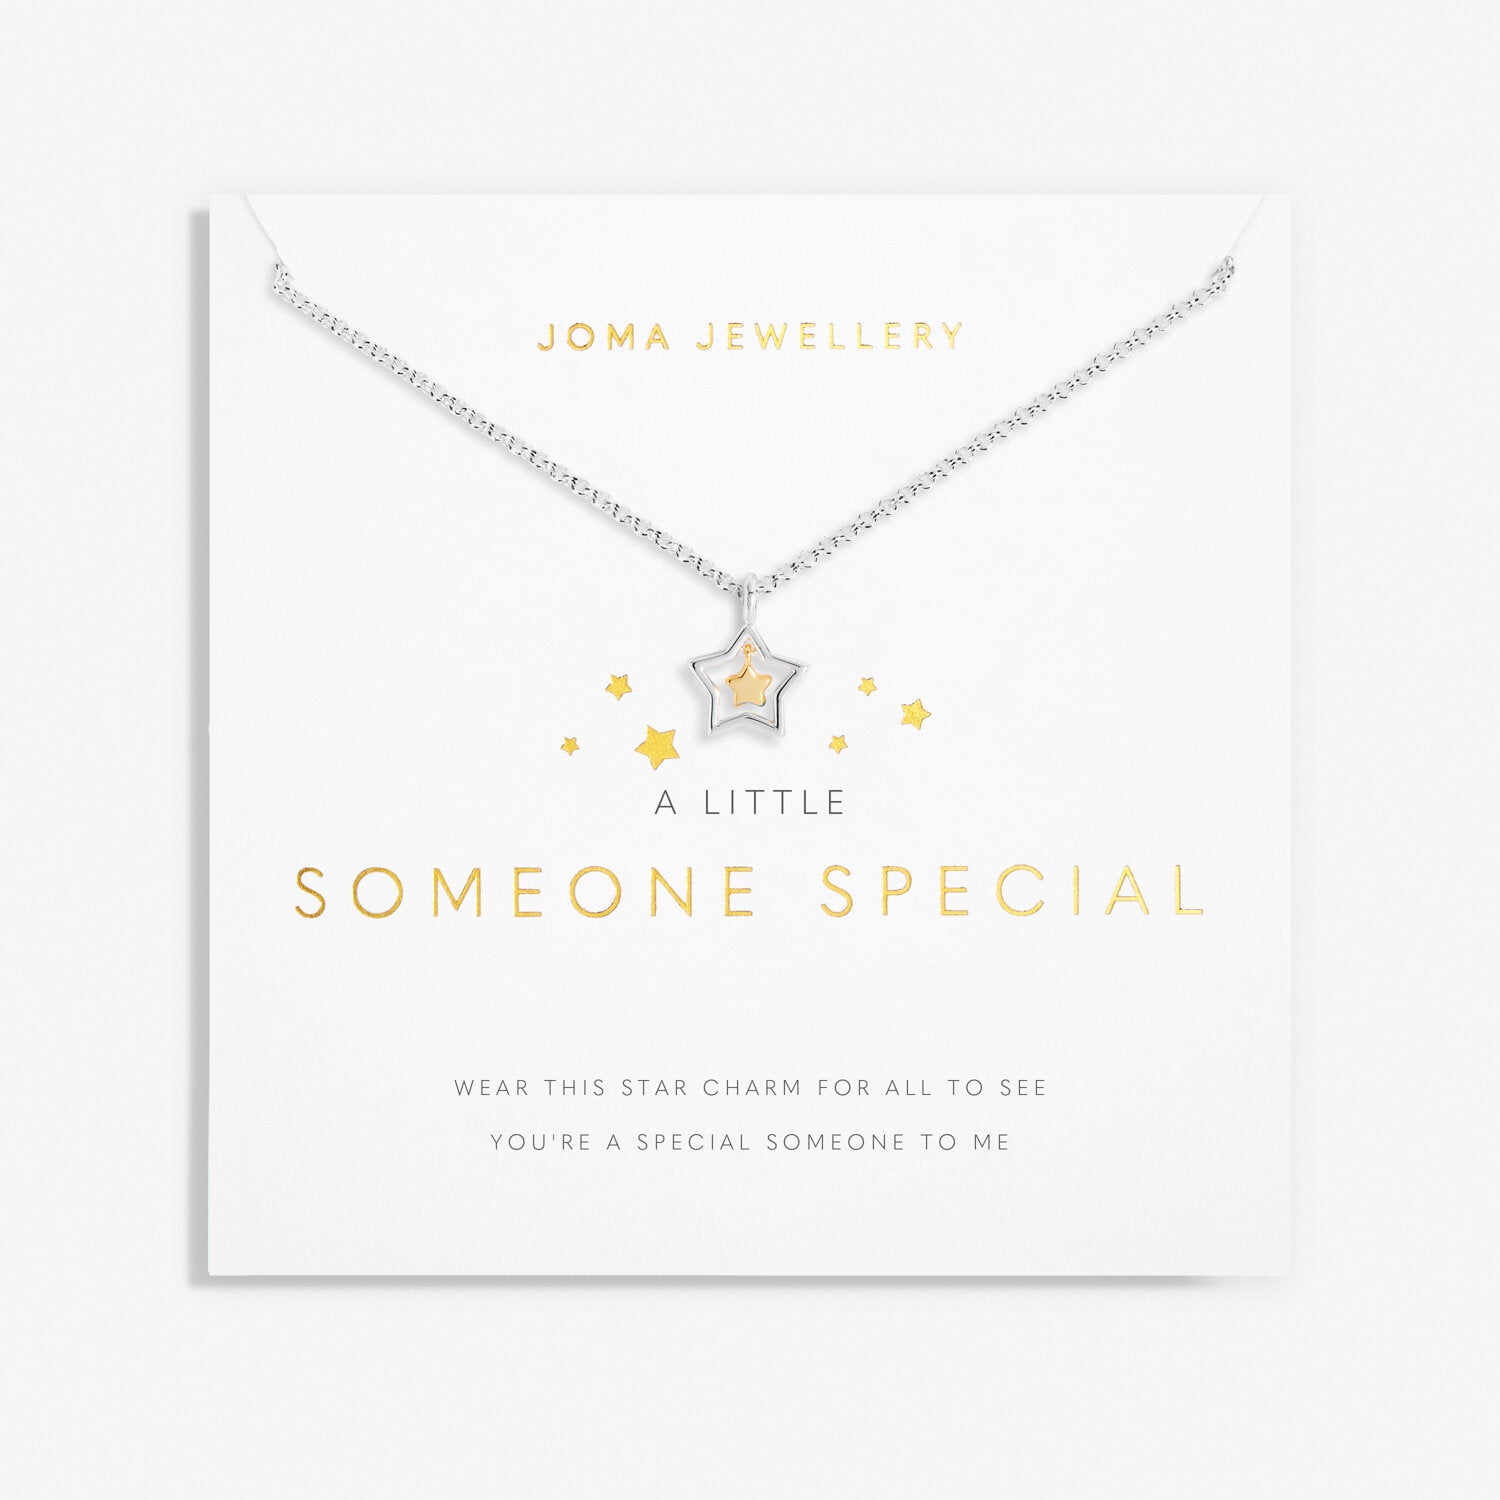 A Little - Someone Special - Necklace